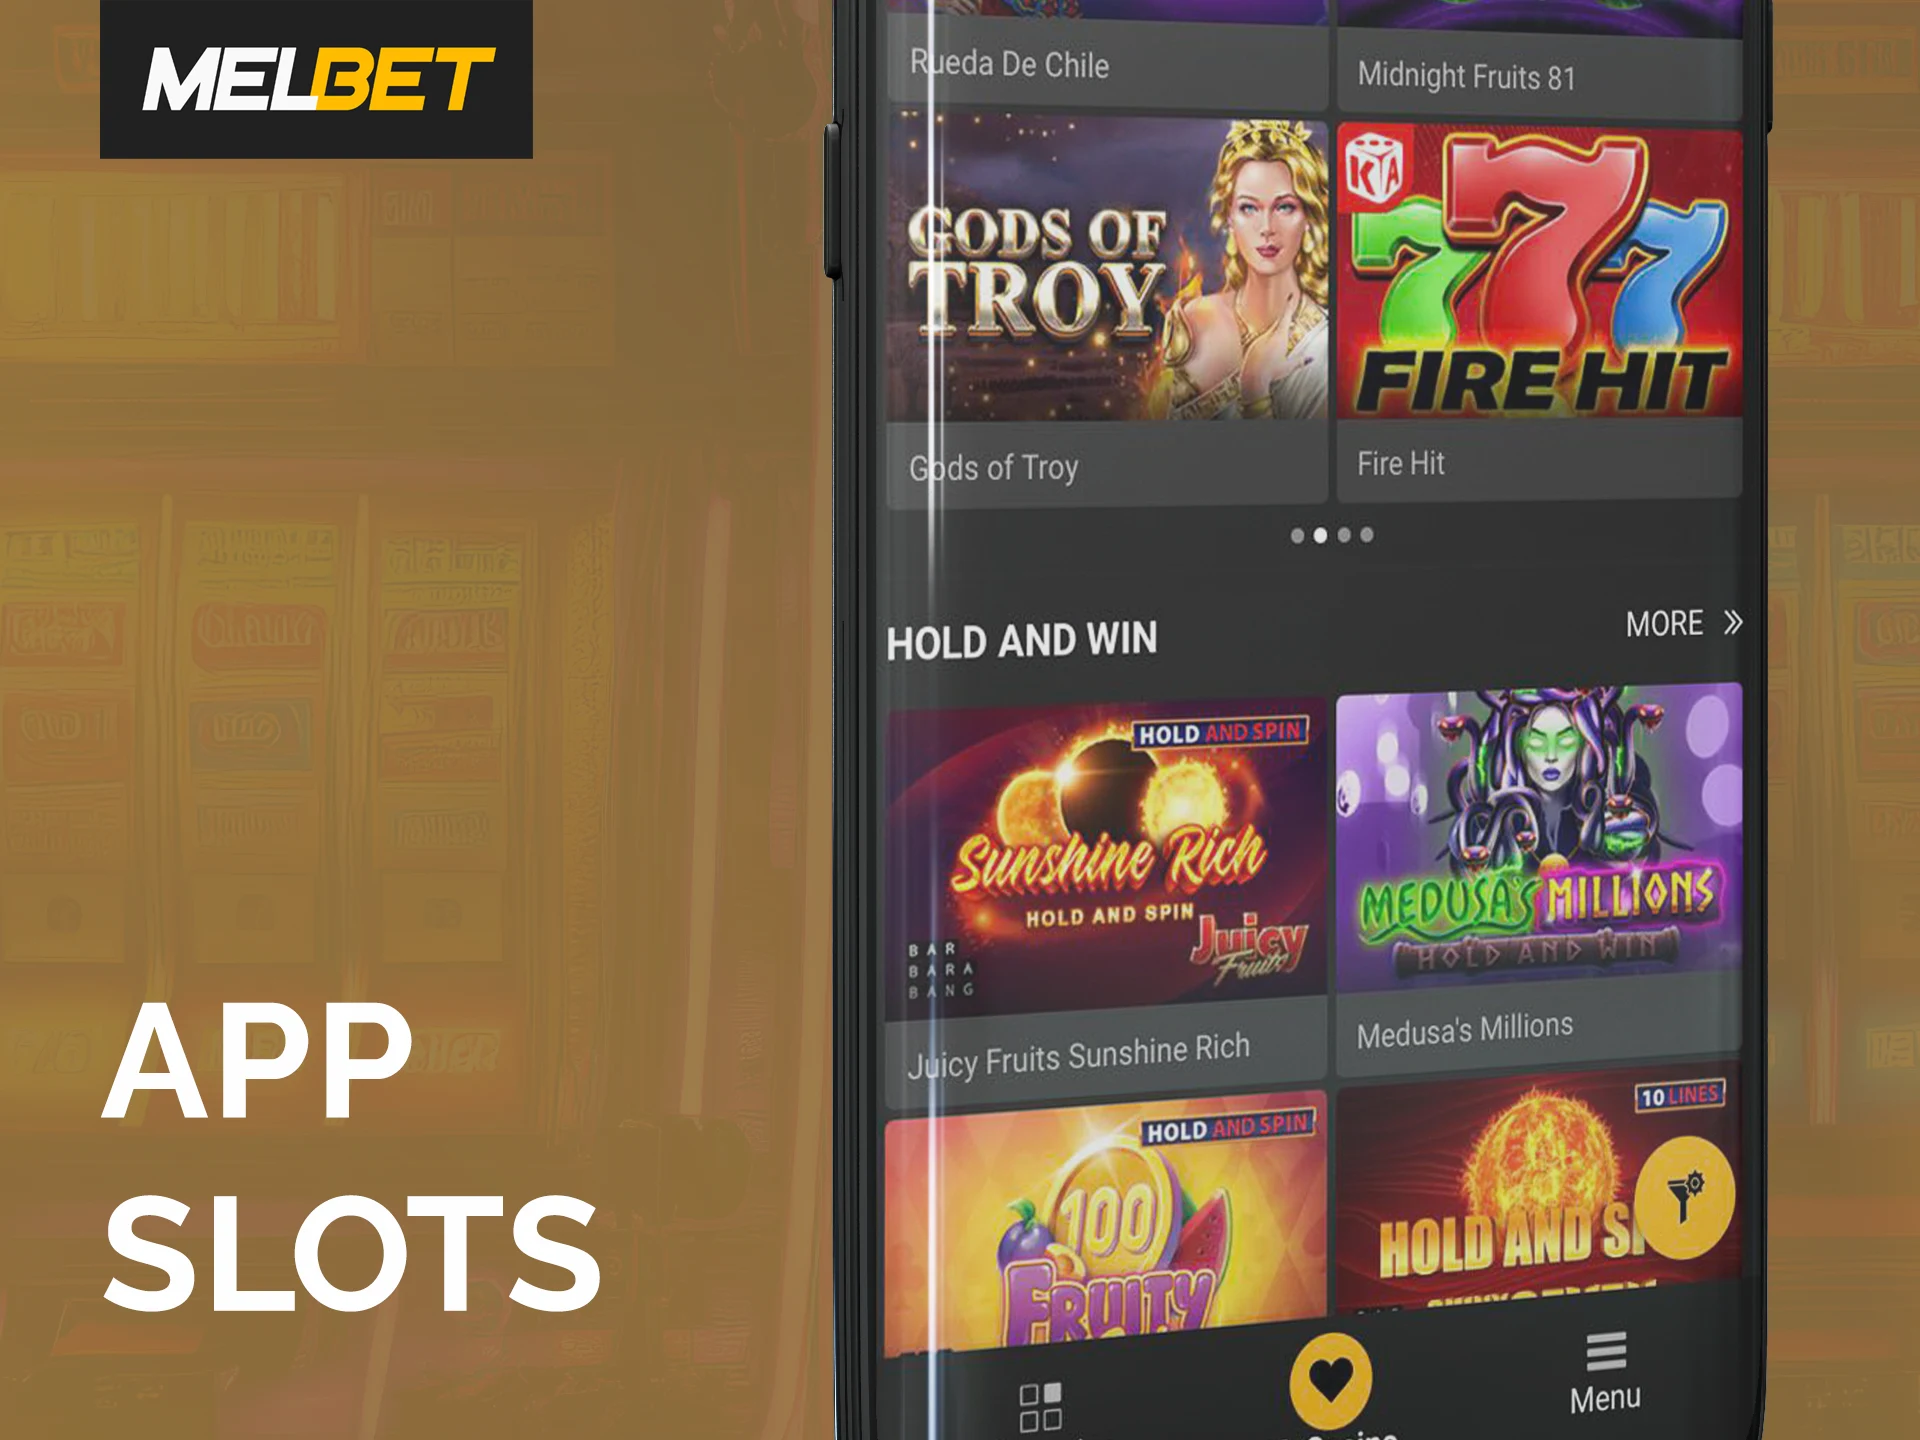 Choose your favorite kind of slot and play.